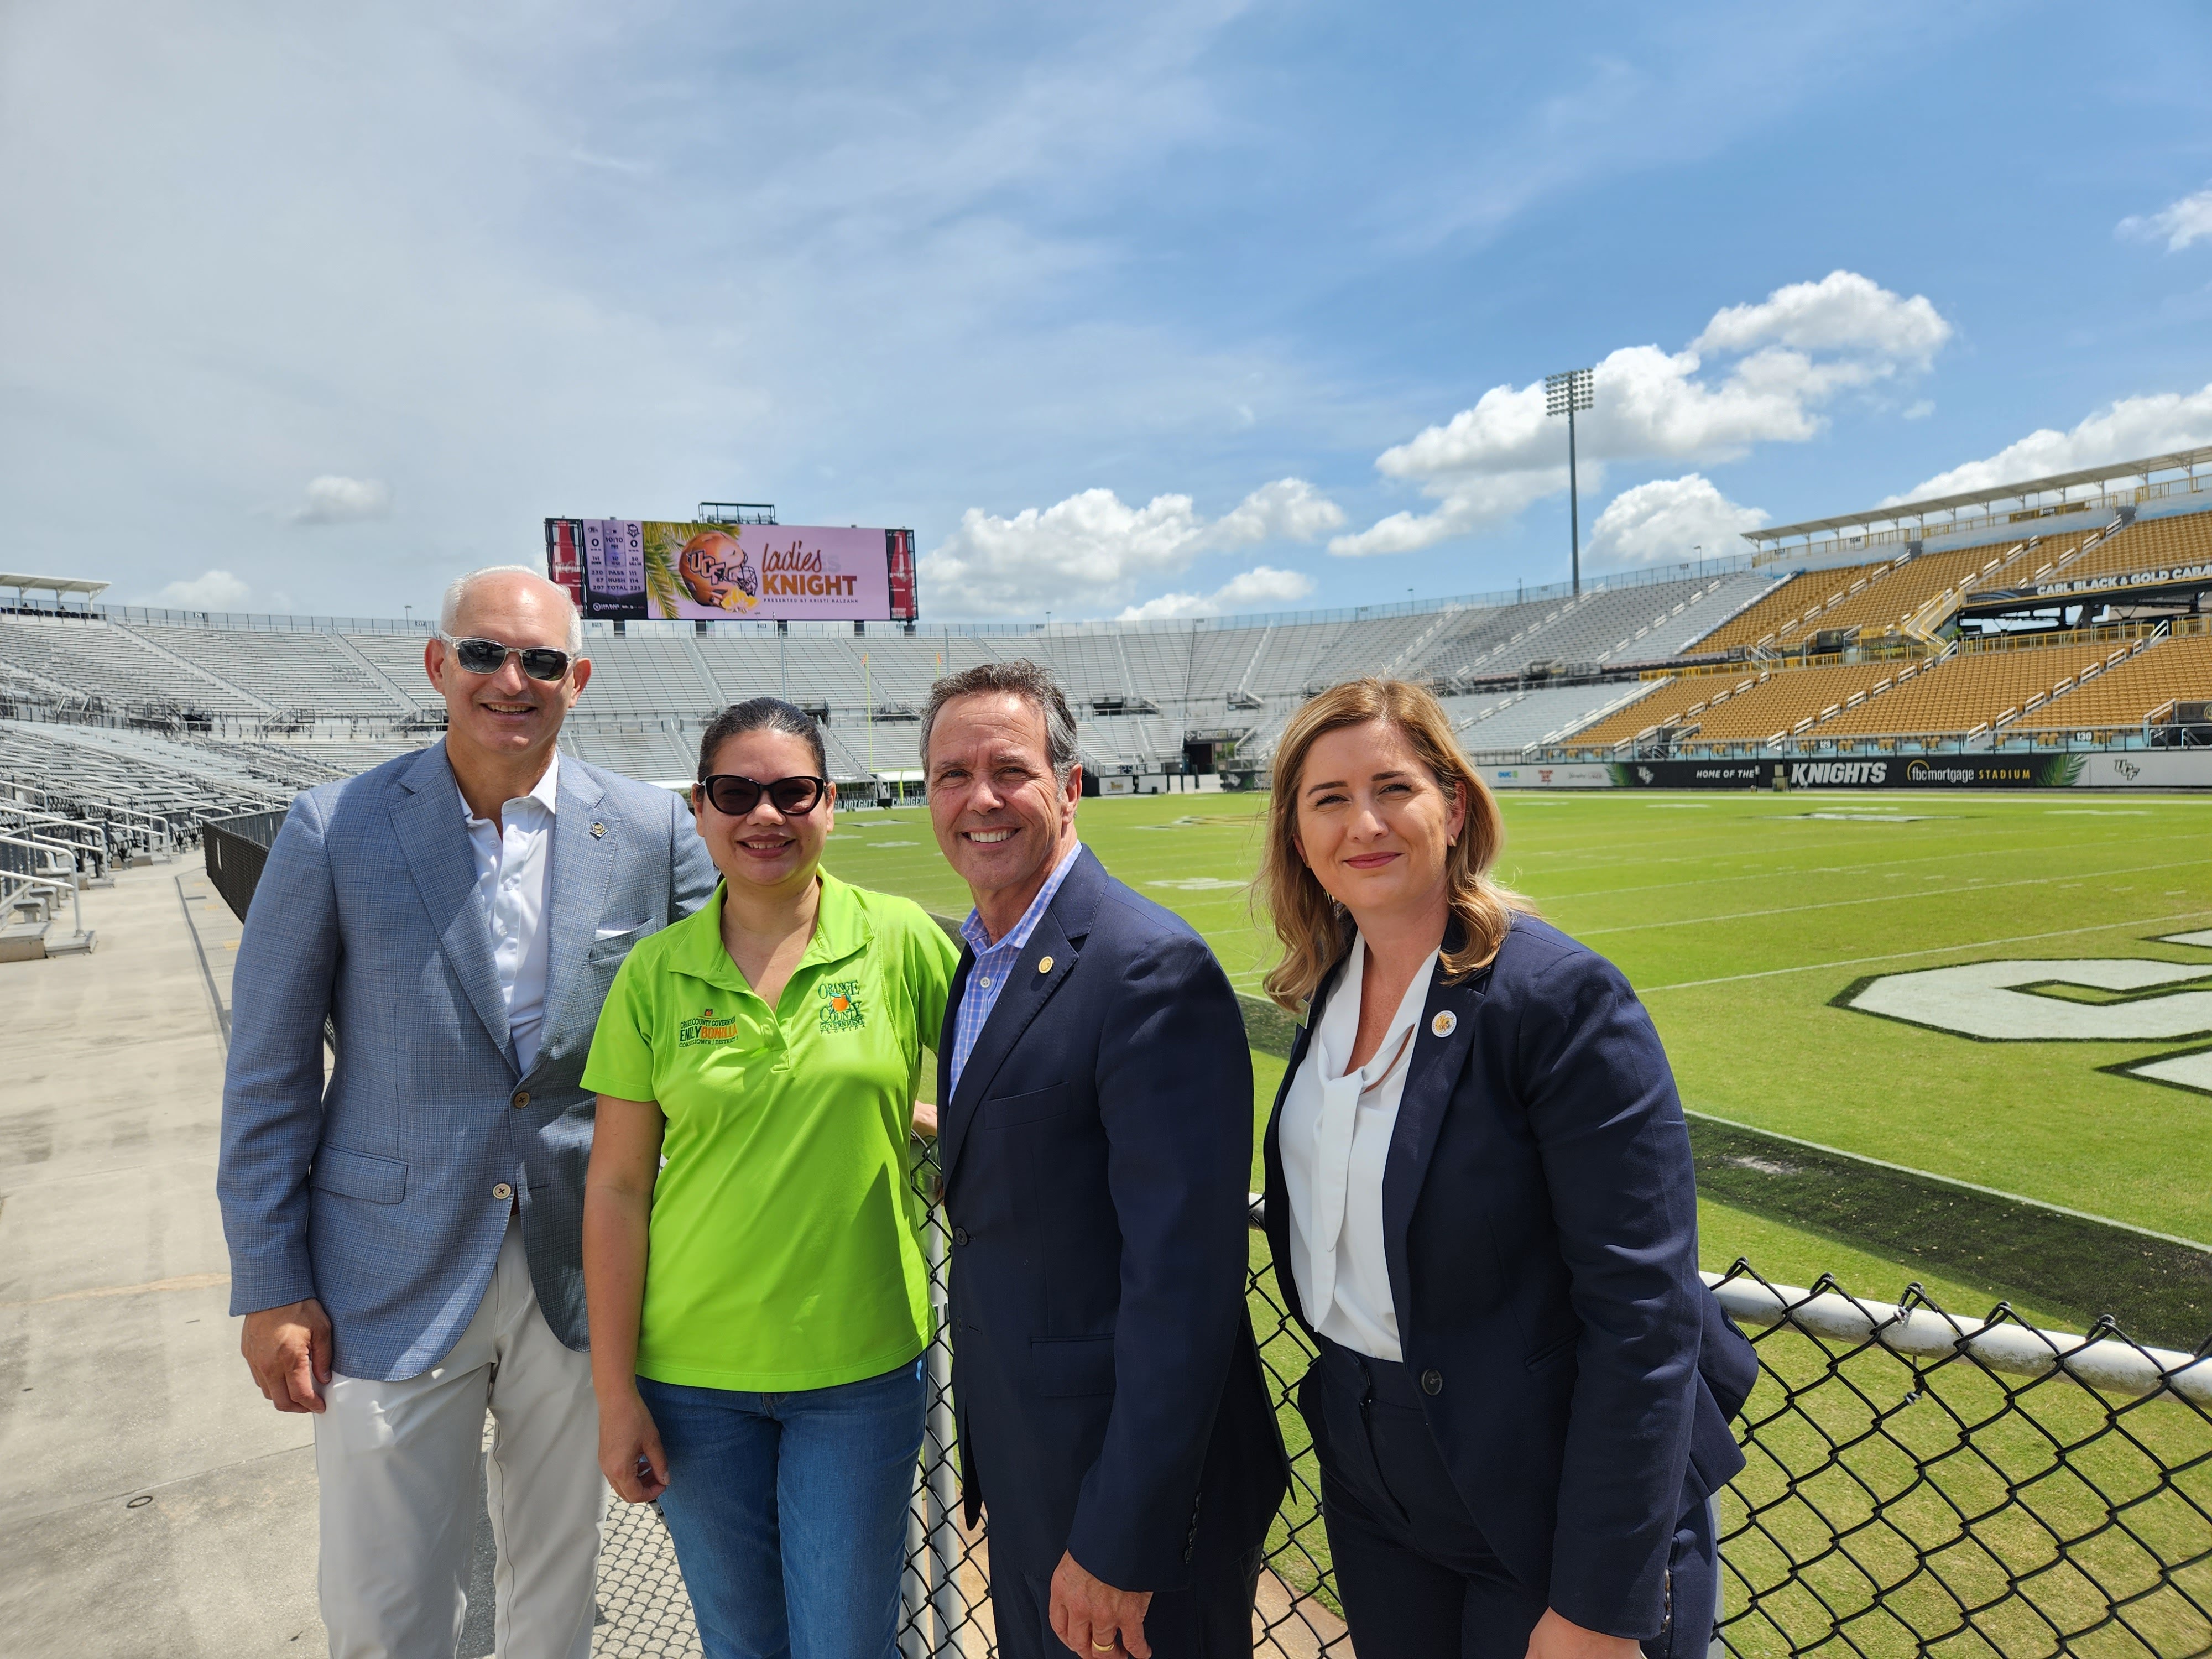 Commissioner Bonilla and members of UCF posing for a picture during the tour of UCF Athletic Department